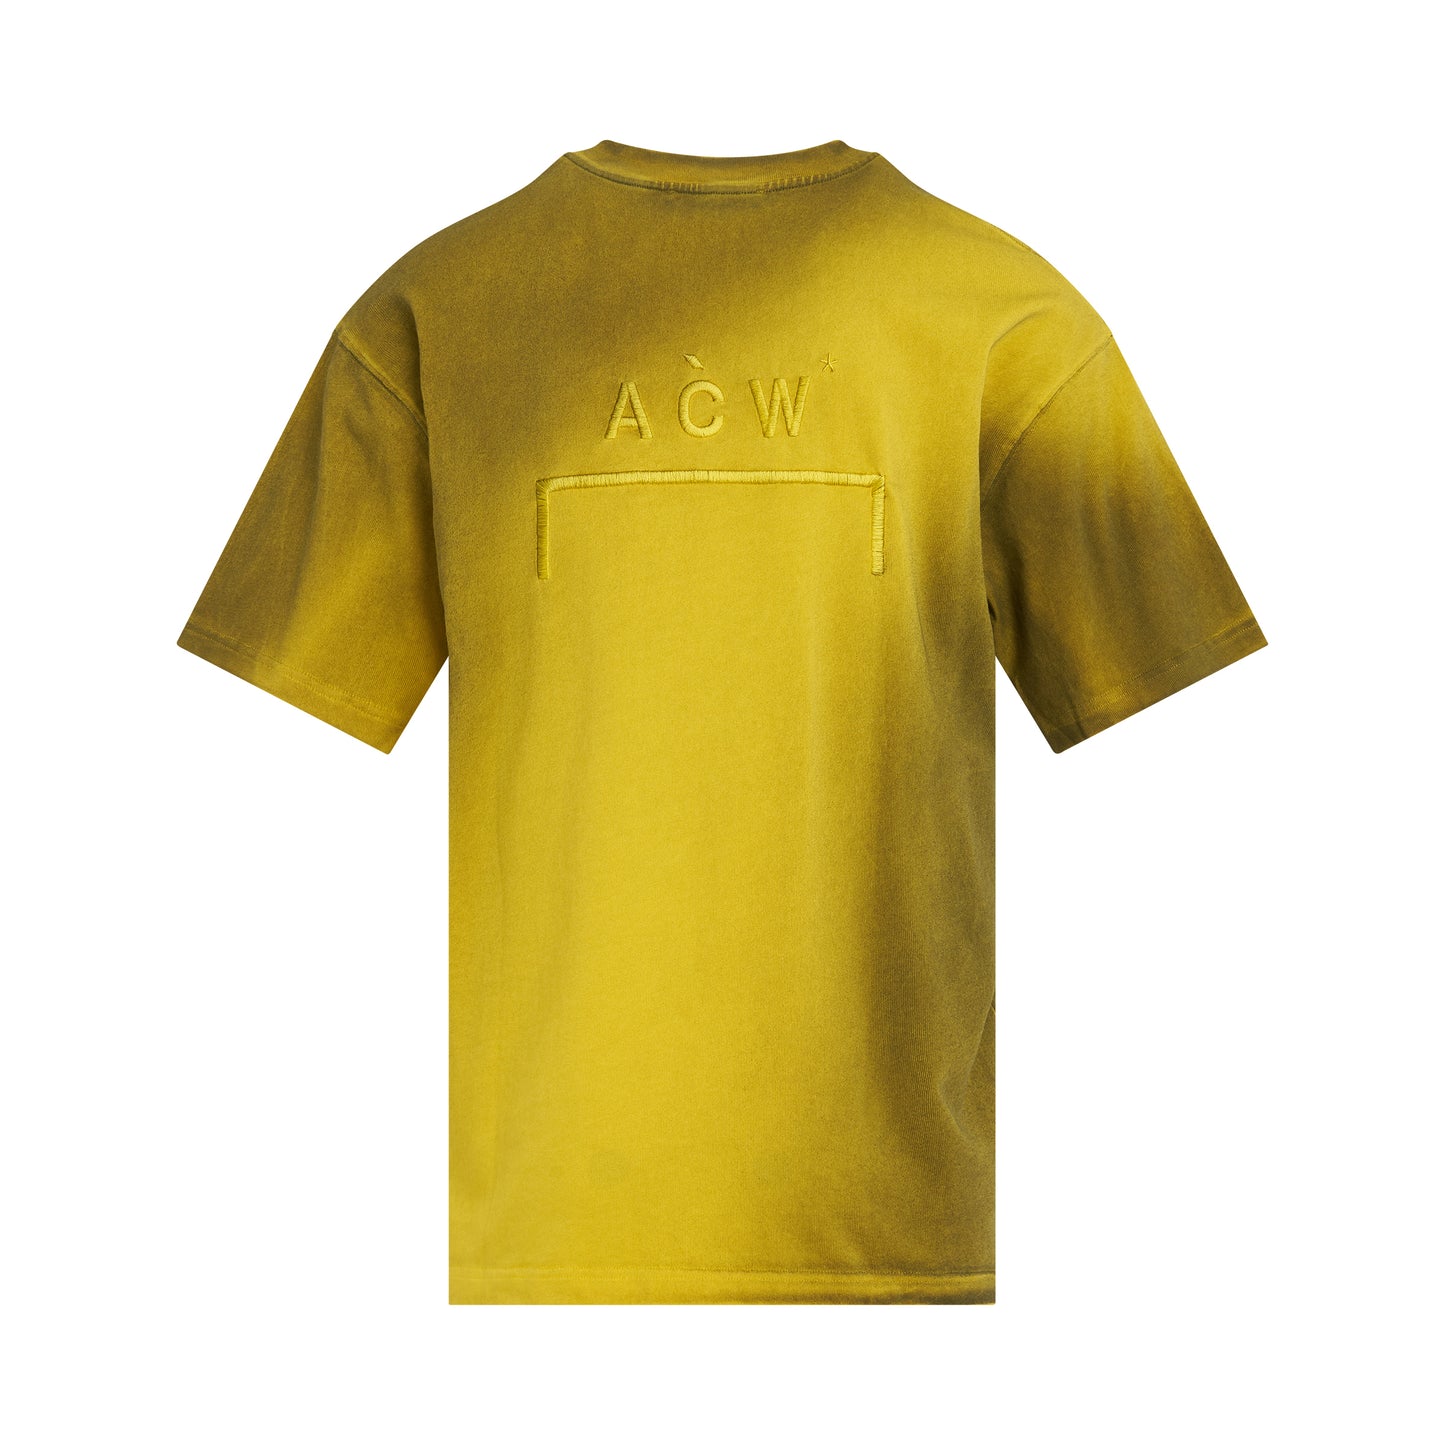 Gradient S/S T-Shirt in Tuscan Yellow